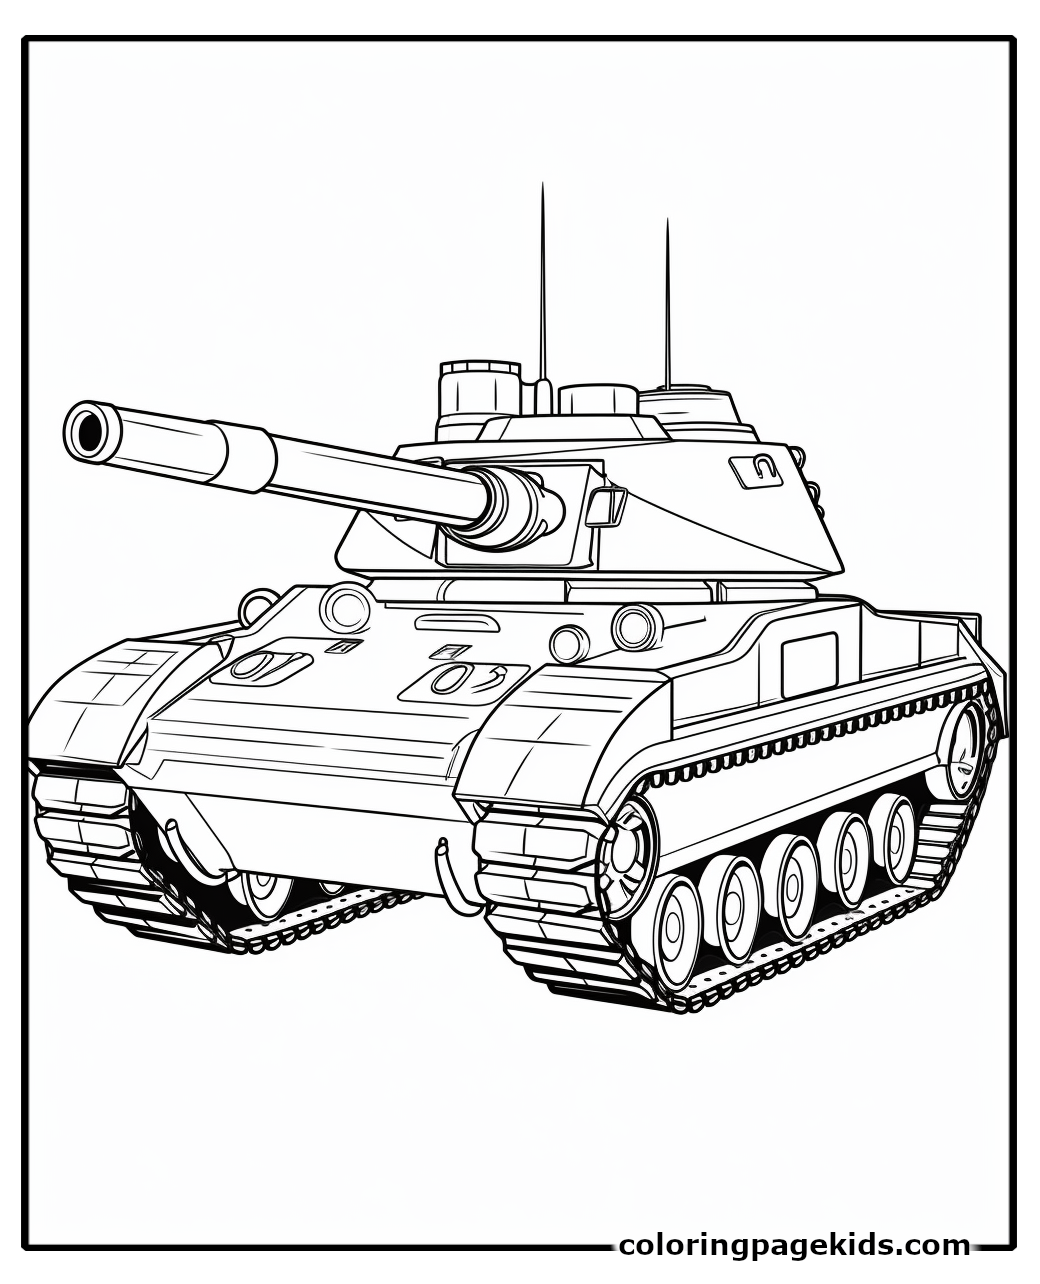 Free Printable Army Tank Coloring Pages